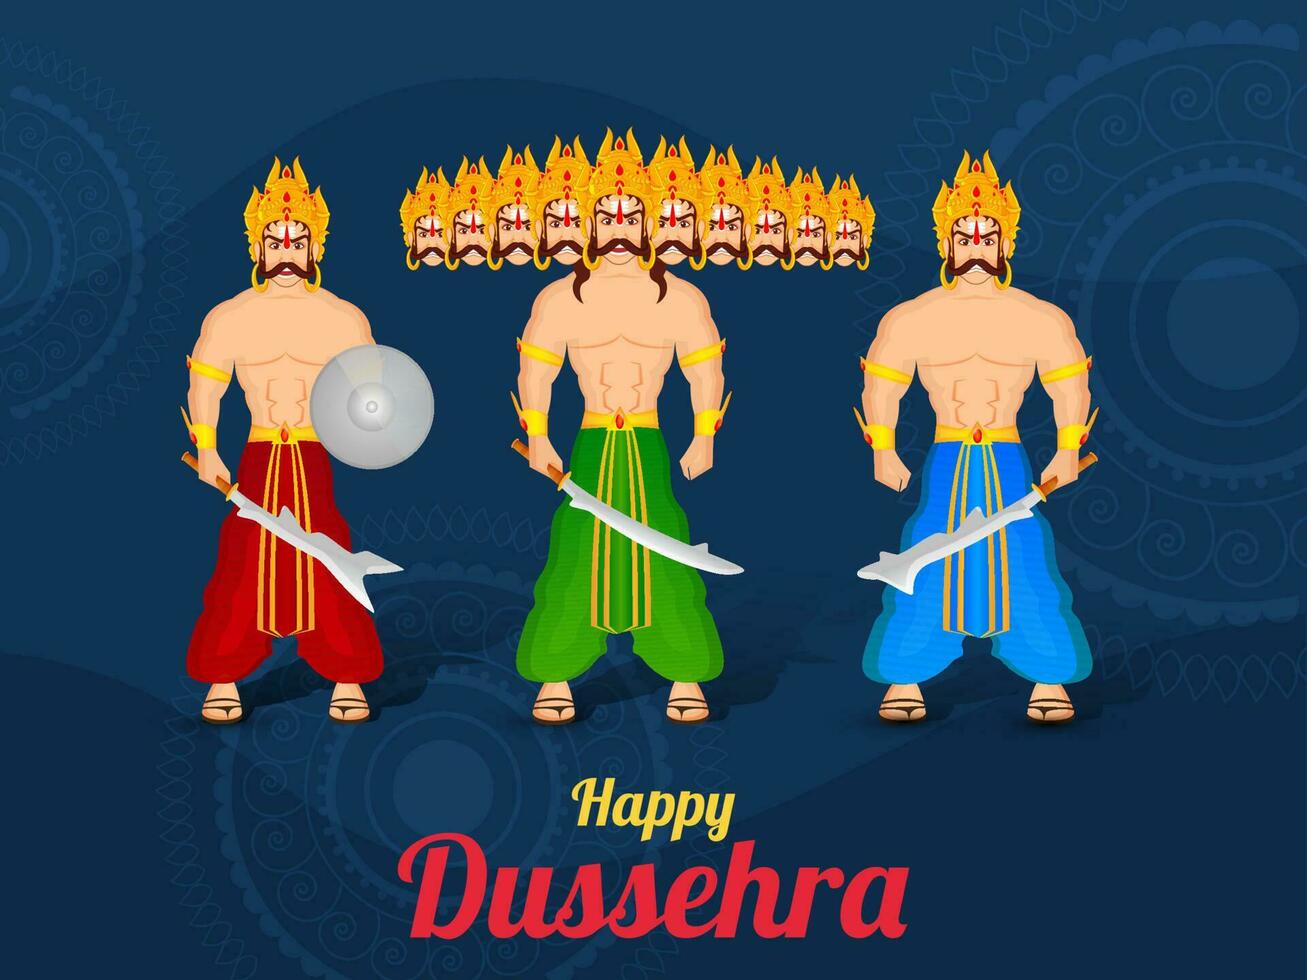 Hindu Mythological Demon King Ravana With His Brother Kumbhkarana And Son Meghnad Standing Together On The Occasion Of Dussehra Festival. vector